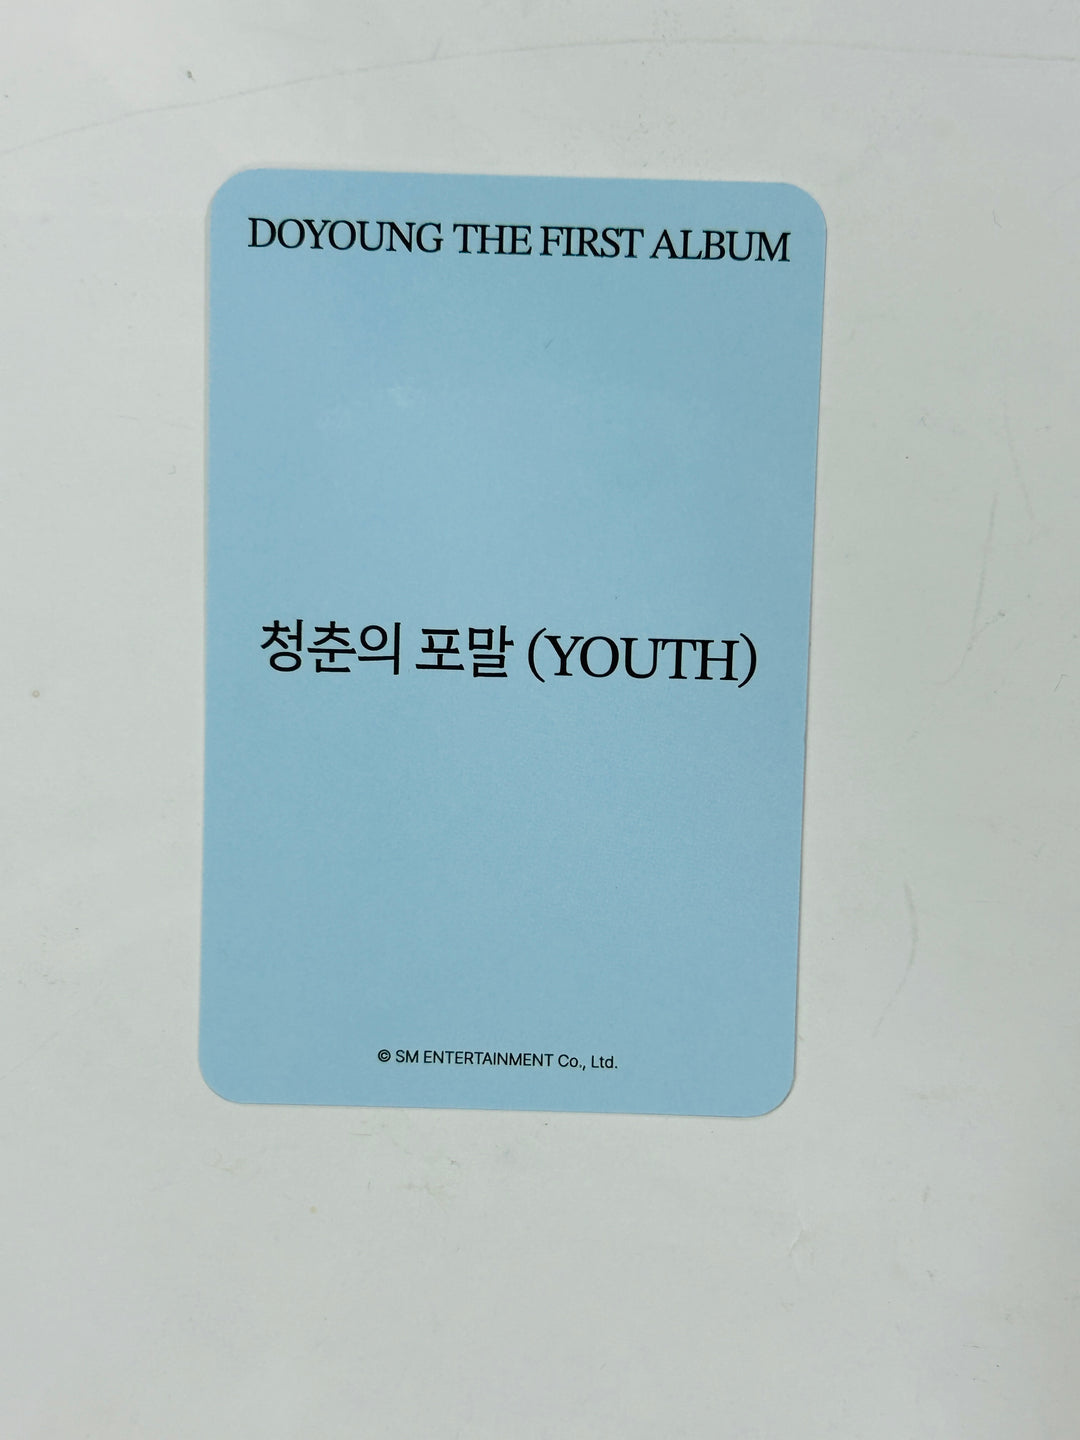 DOYOUNG (Of NCT) "YOUTH" - Everline Event Photocard [24.4.29]